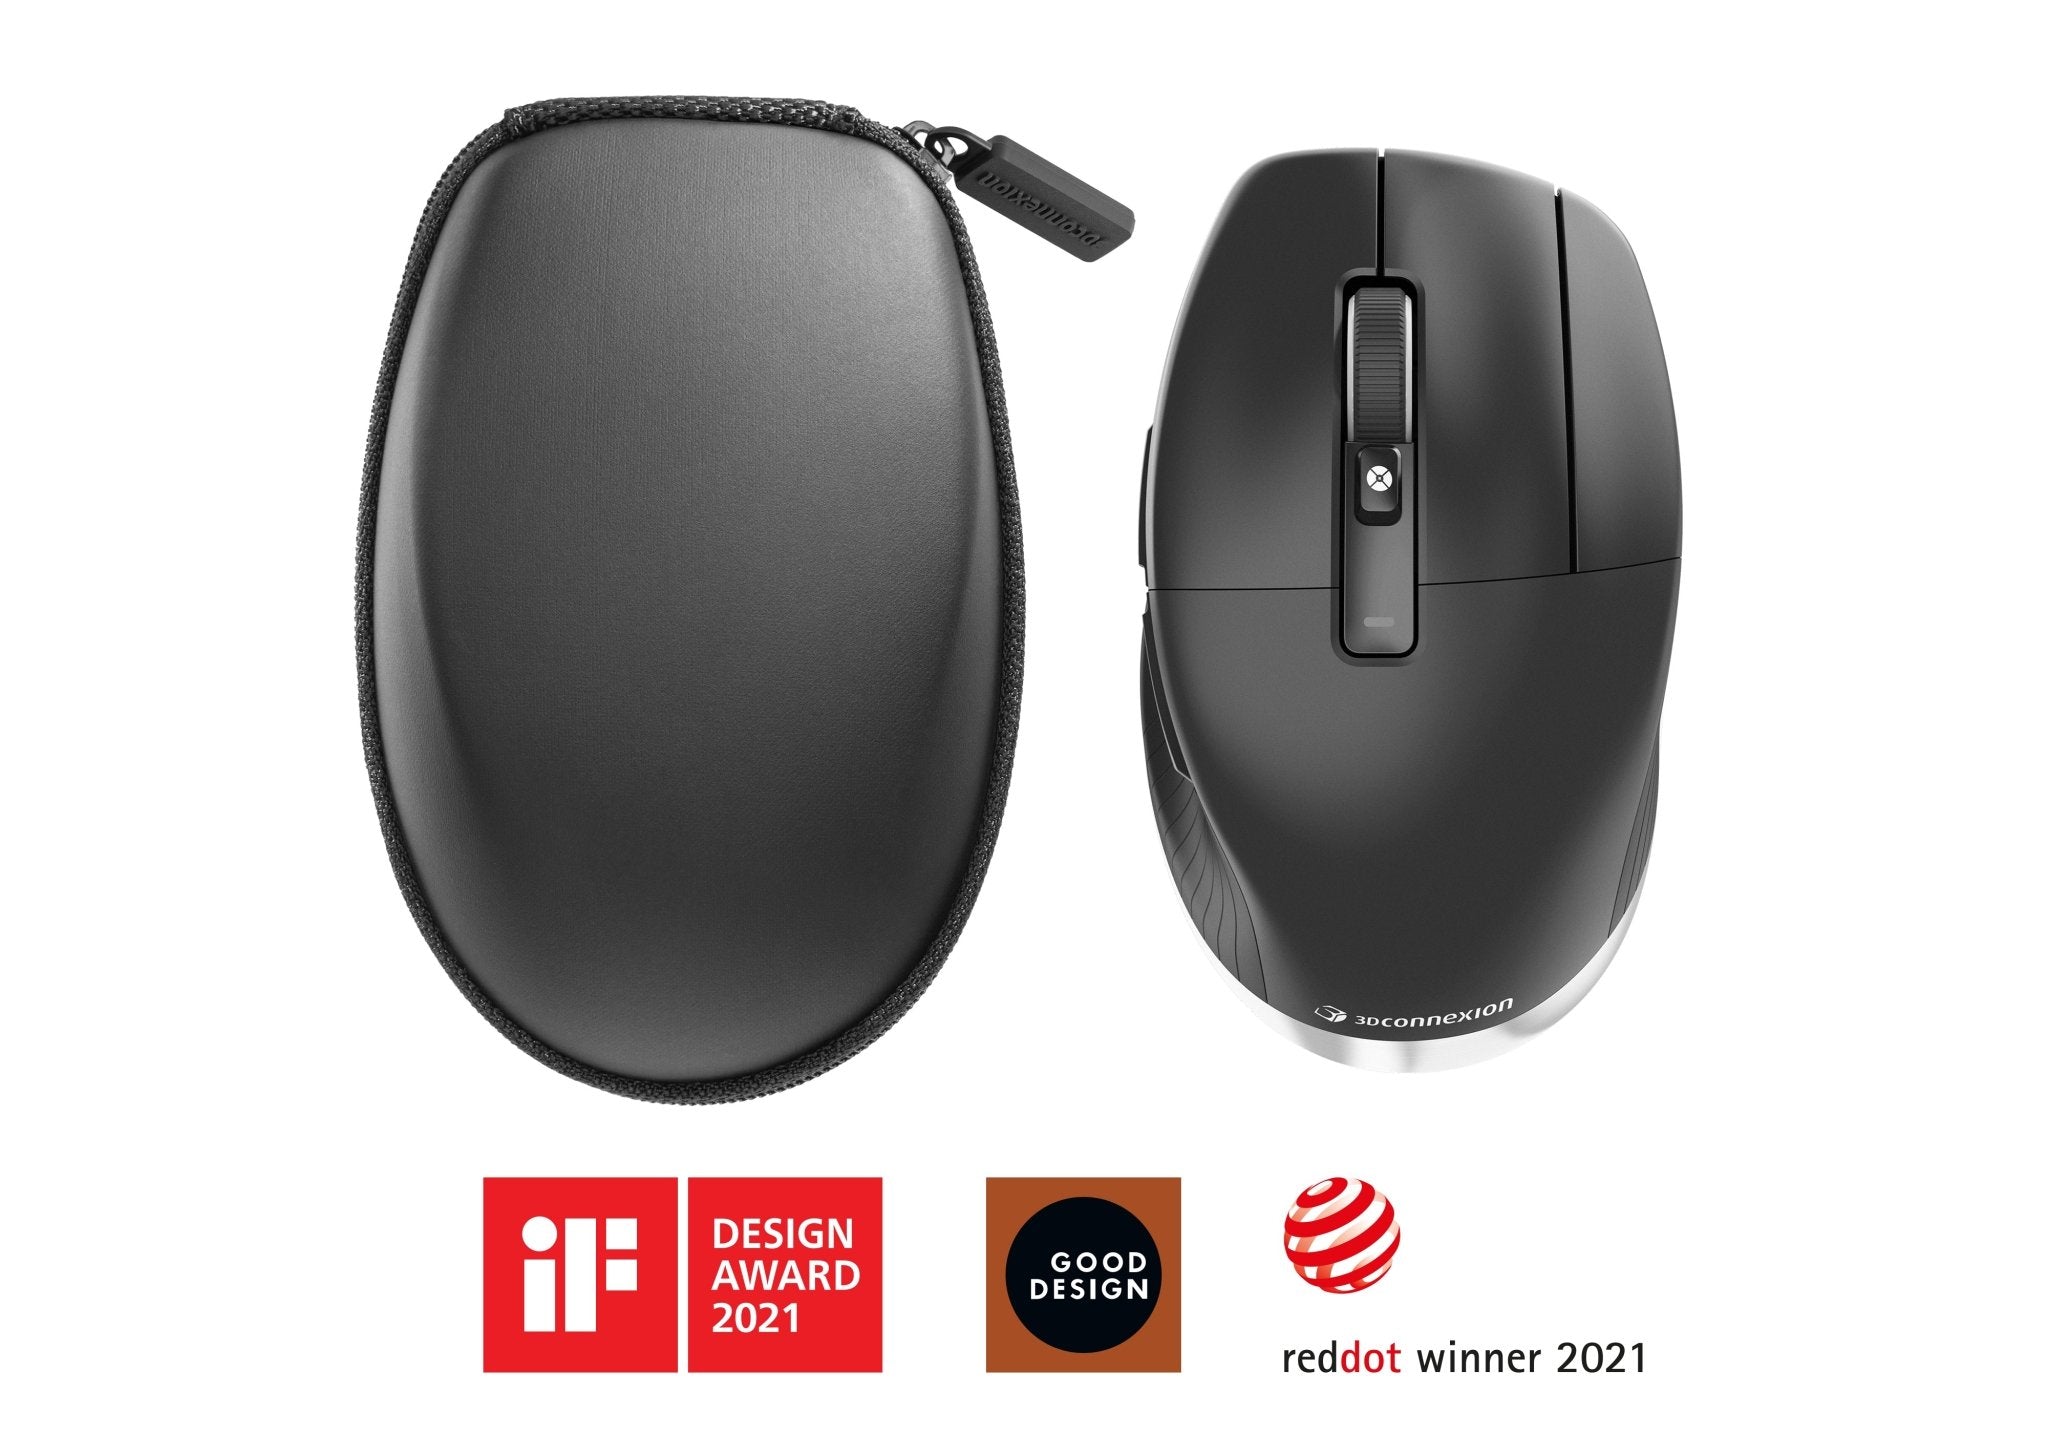 CadMouse Pro Wireless - 3DMouse.ca